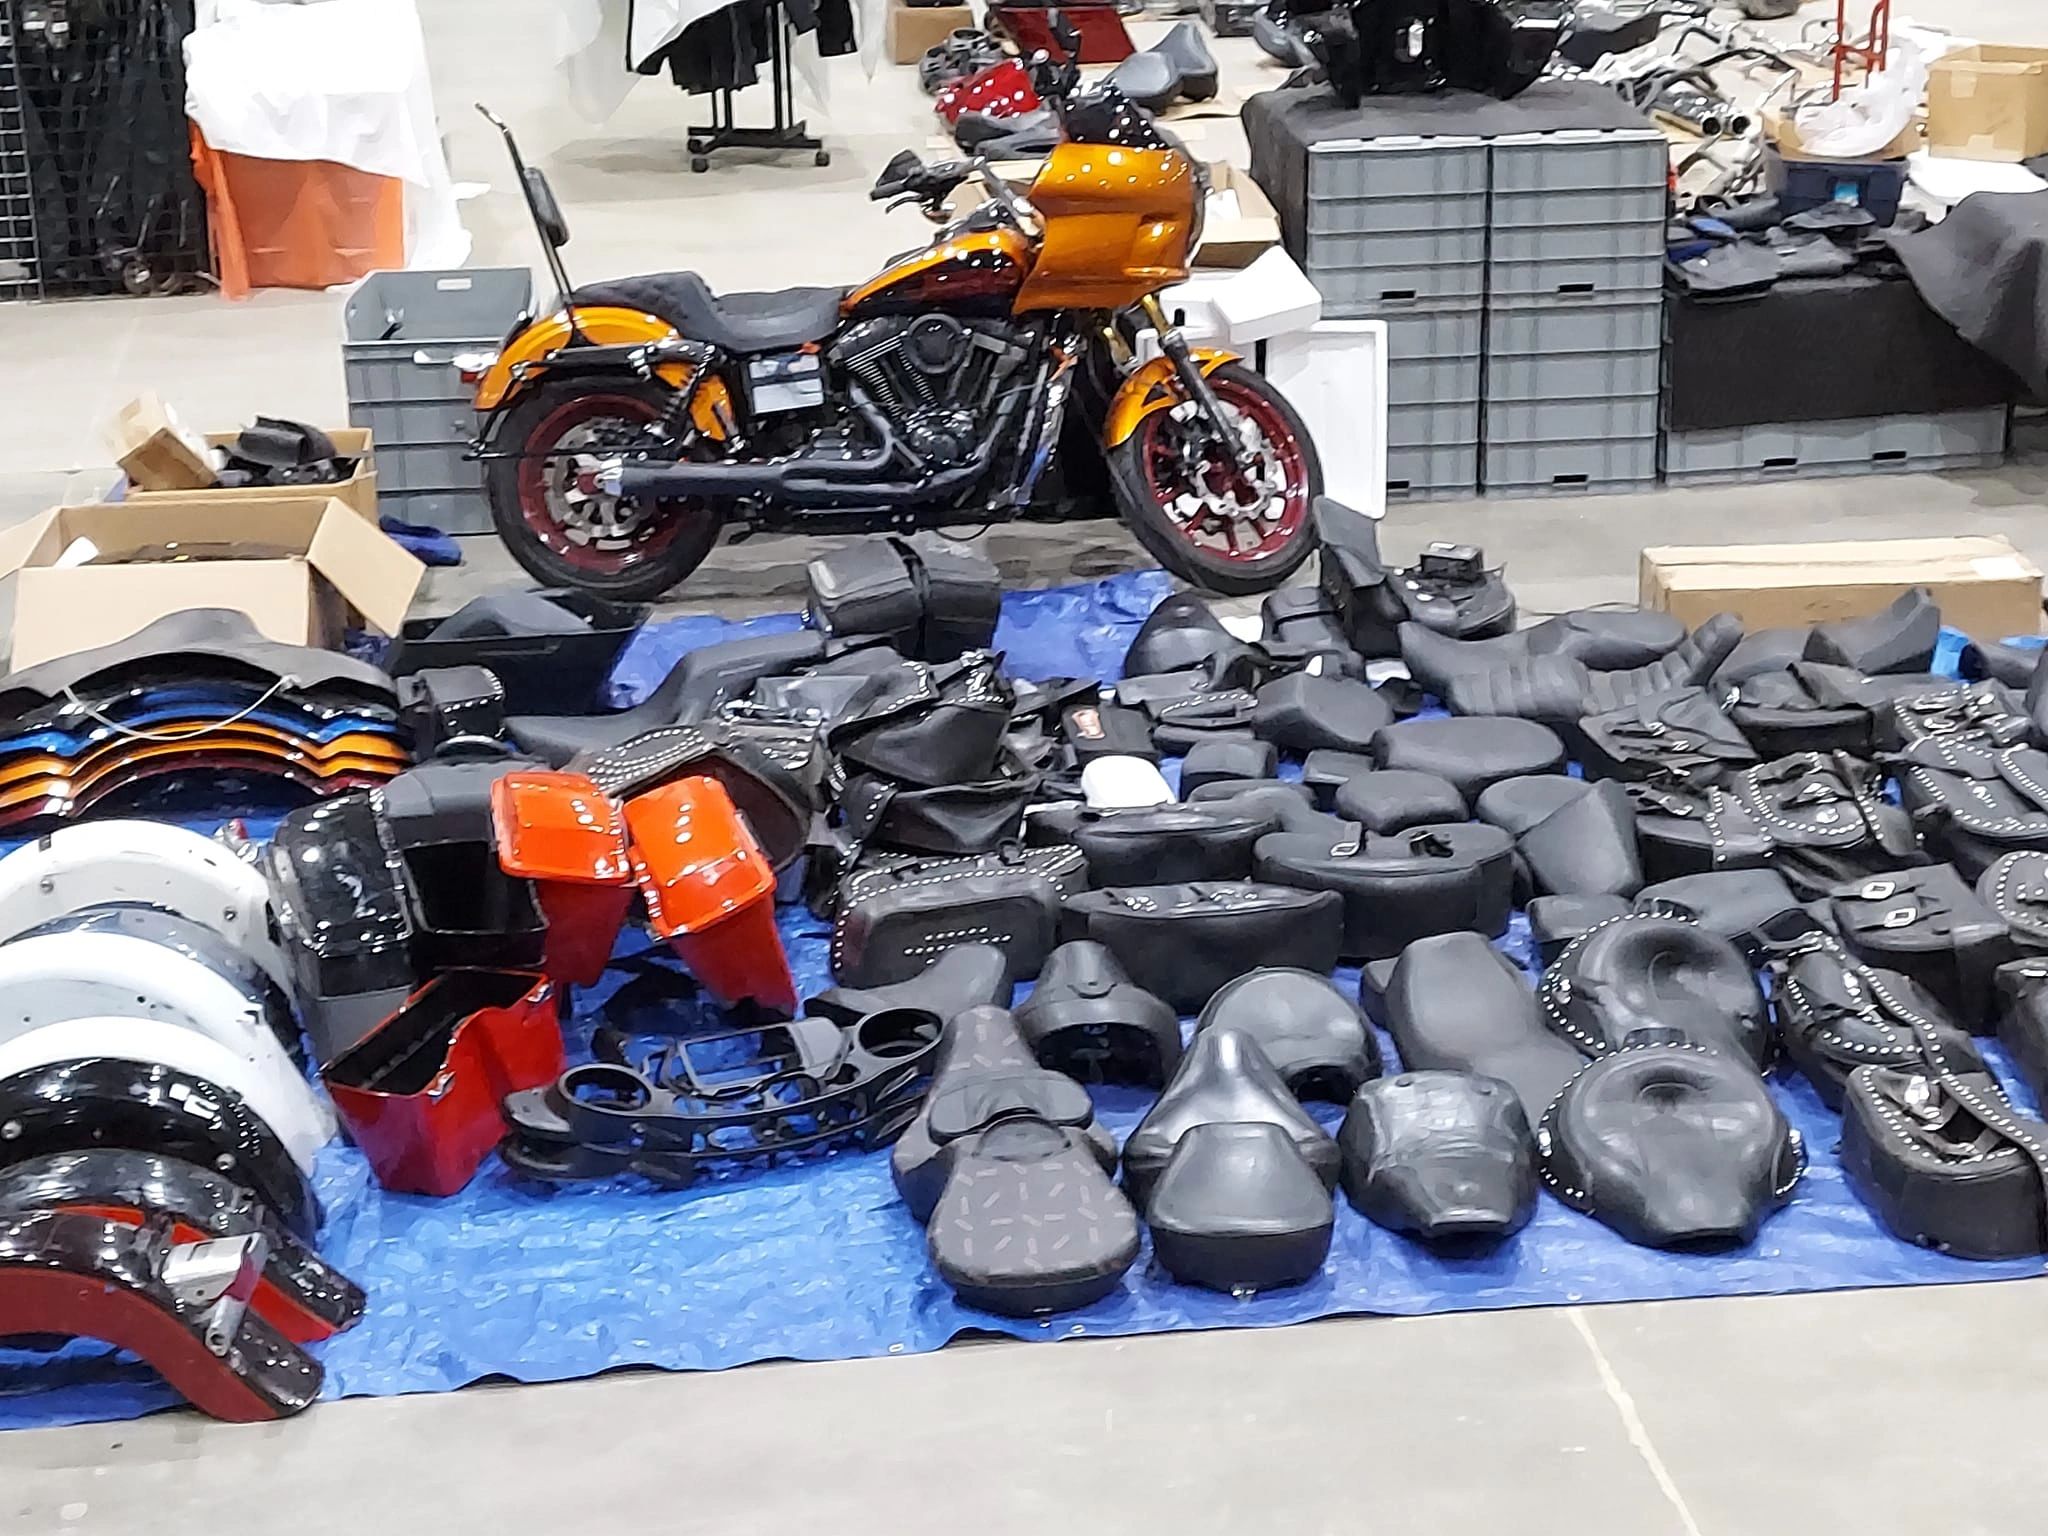 Akron Motorcycle Swap Meet: From Frame to Fringe- Find it All!